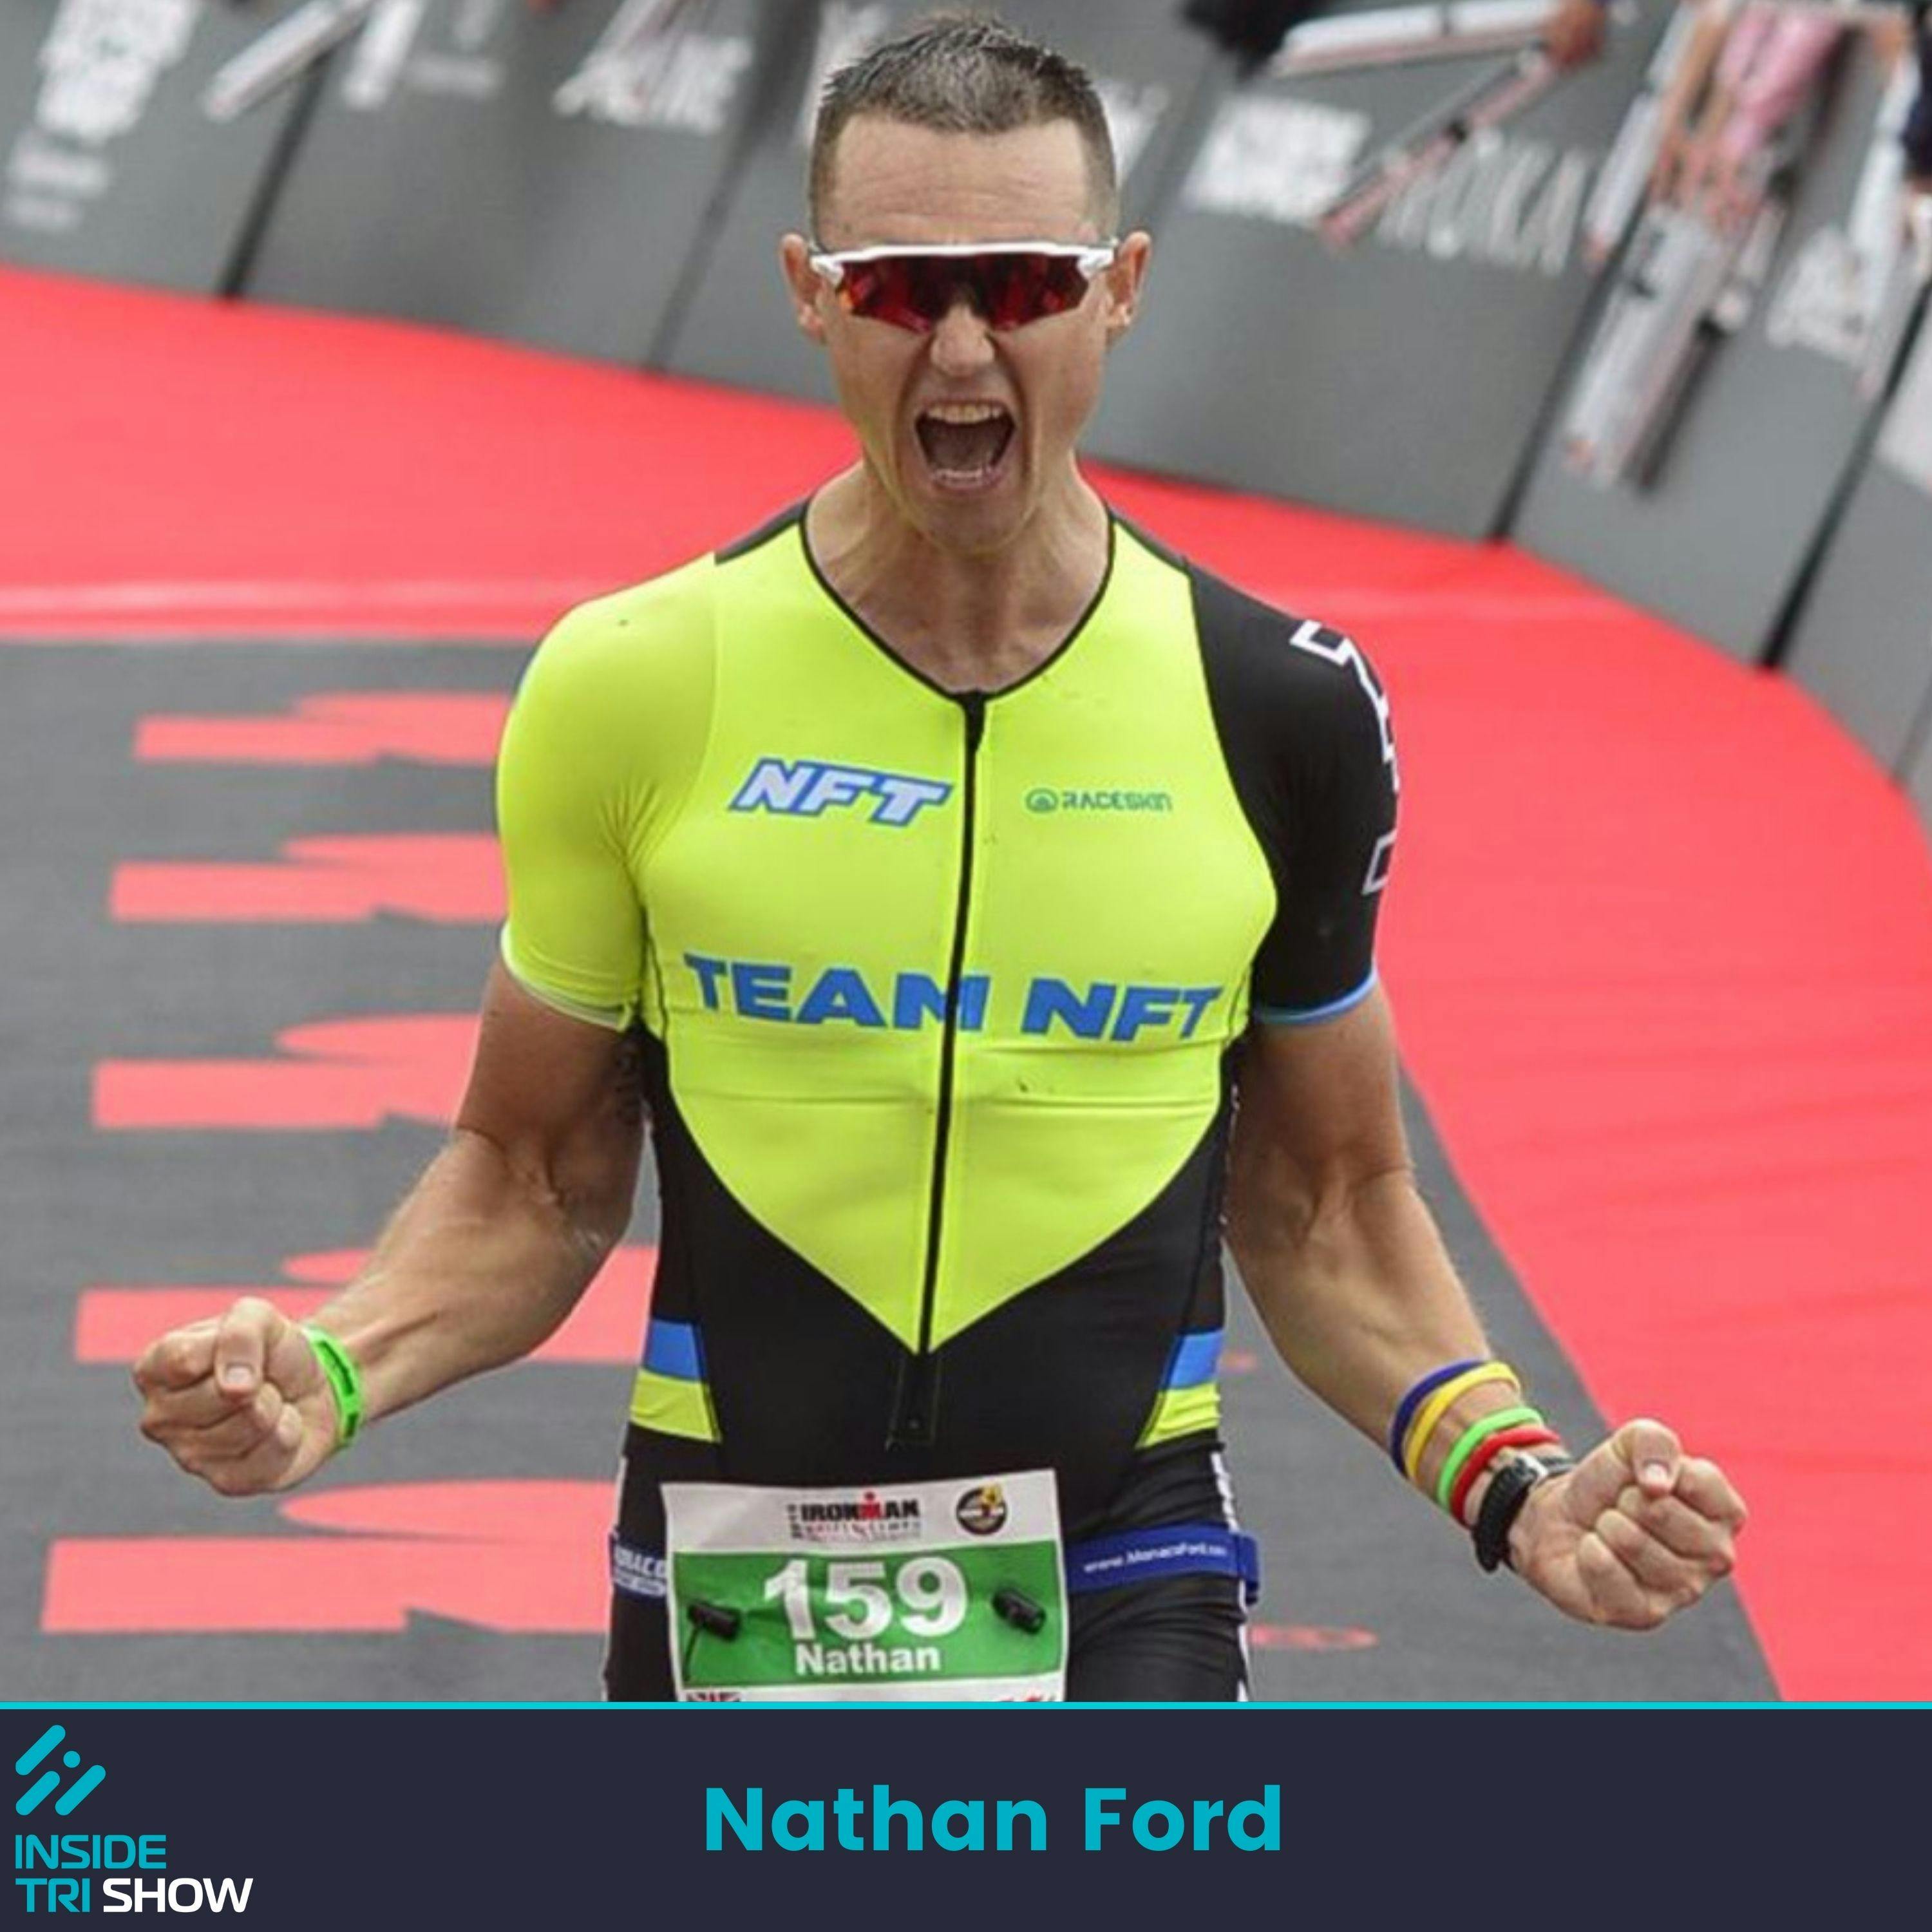 Nathan Ford - You have to move forward